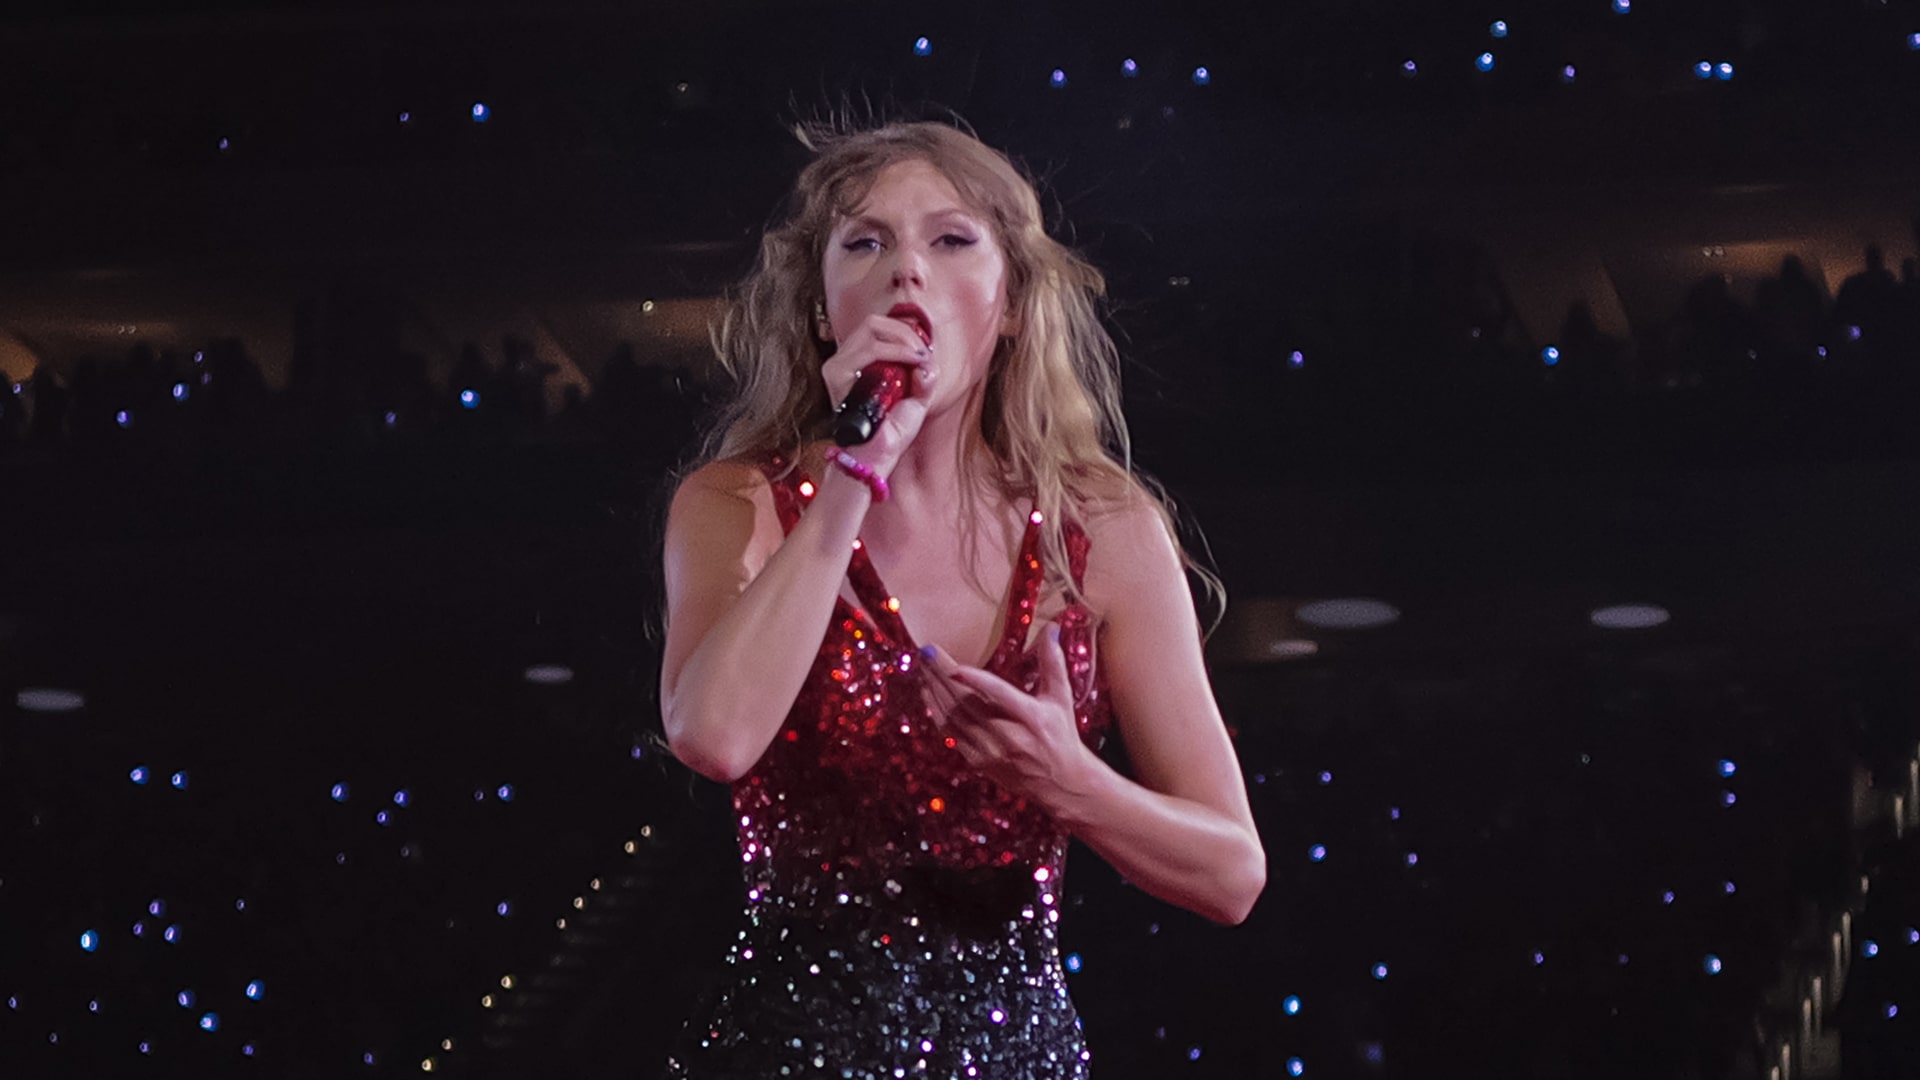 Taylor Swift performing "I Knew You Were Trouble" at the Eras Tour. Paolo V, Wiki Commons.